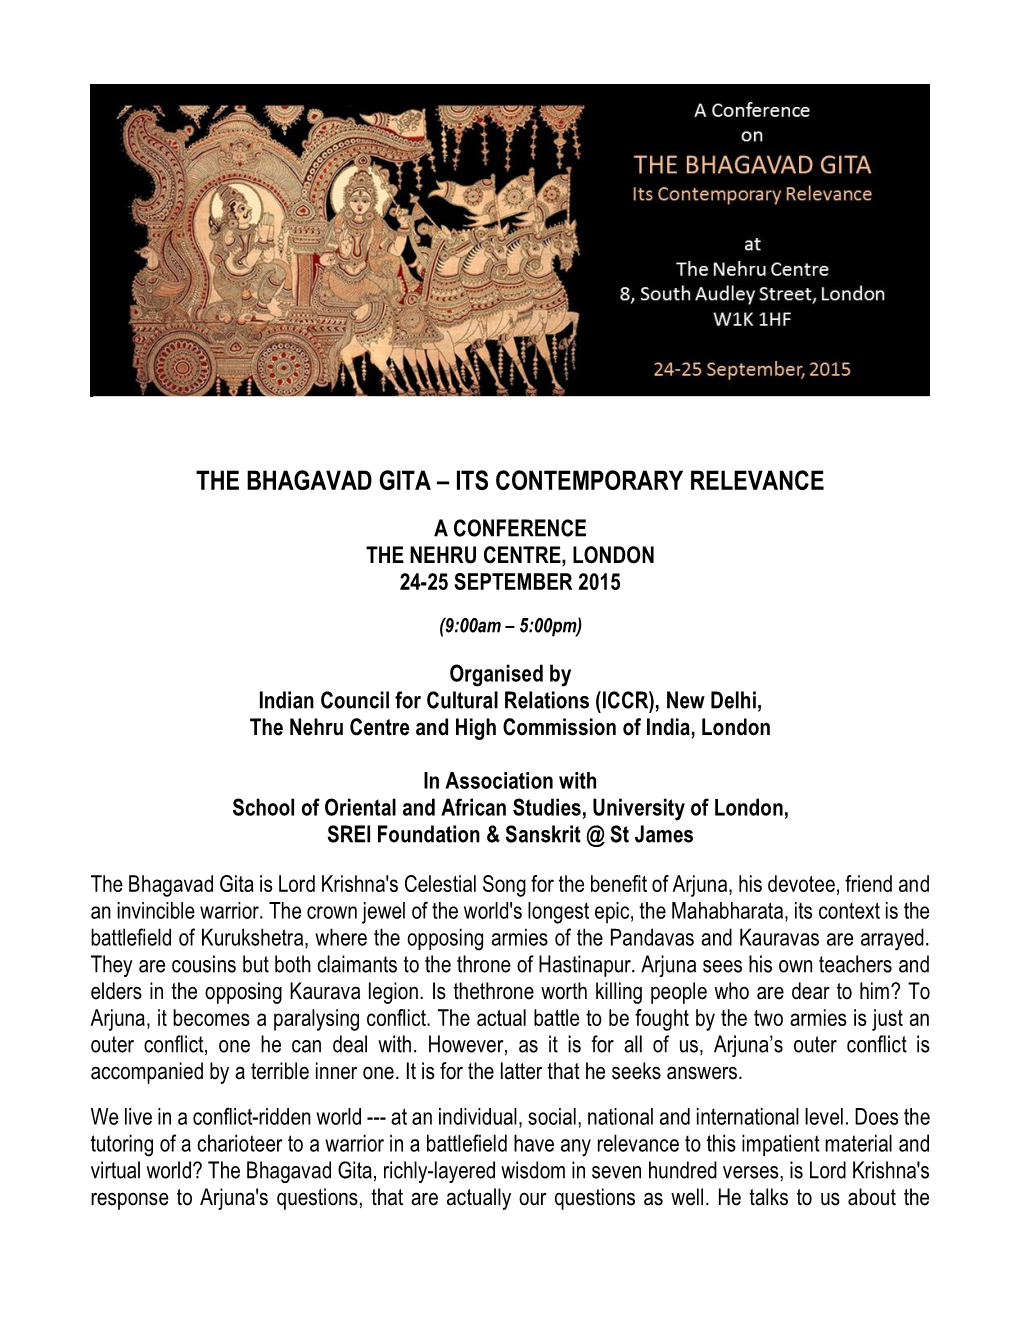 The Bhagavad Gita – Its Contemporary Relevance a Conference the Nehru Centre, London 24-25 September 2015